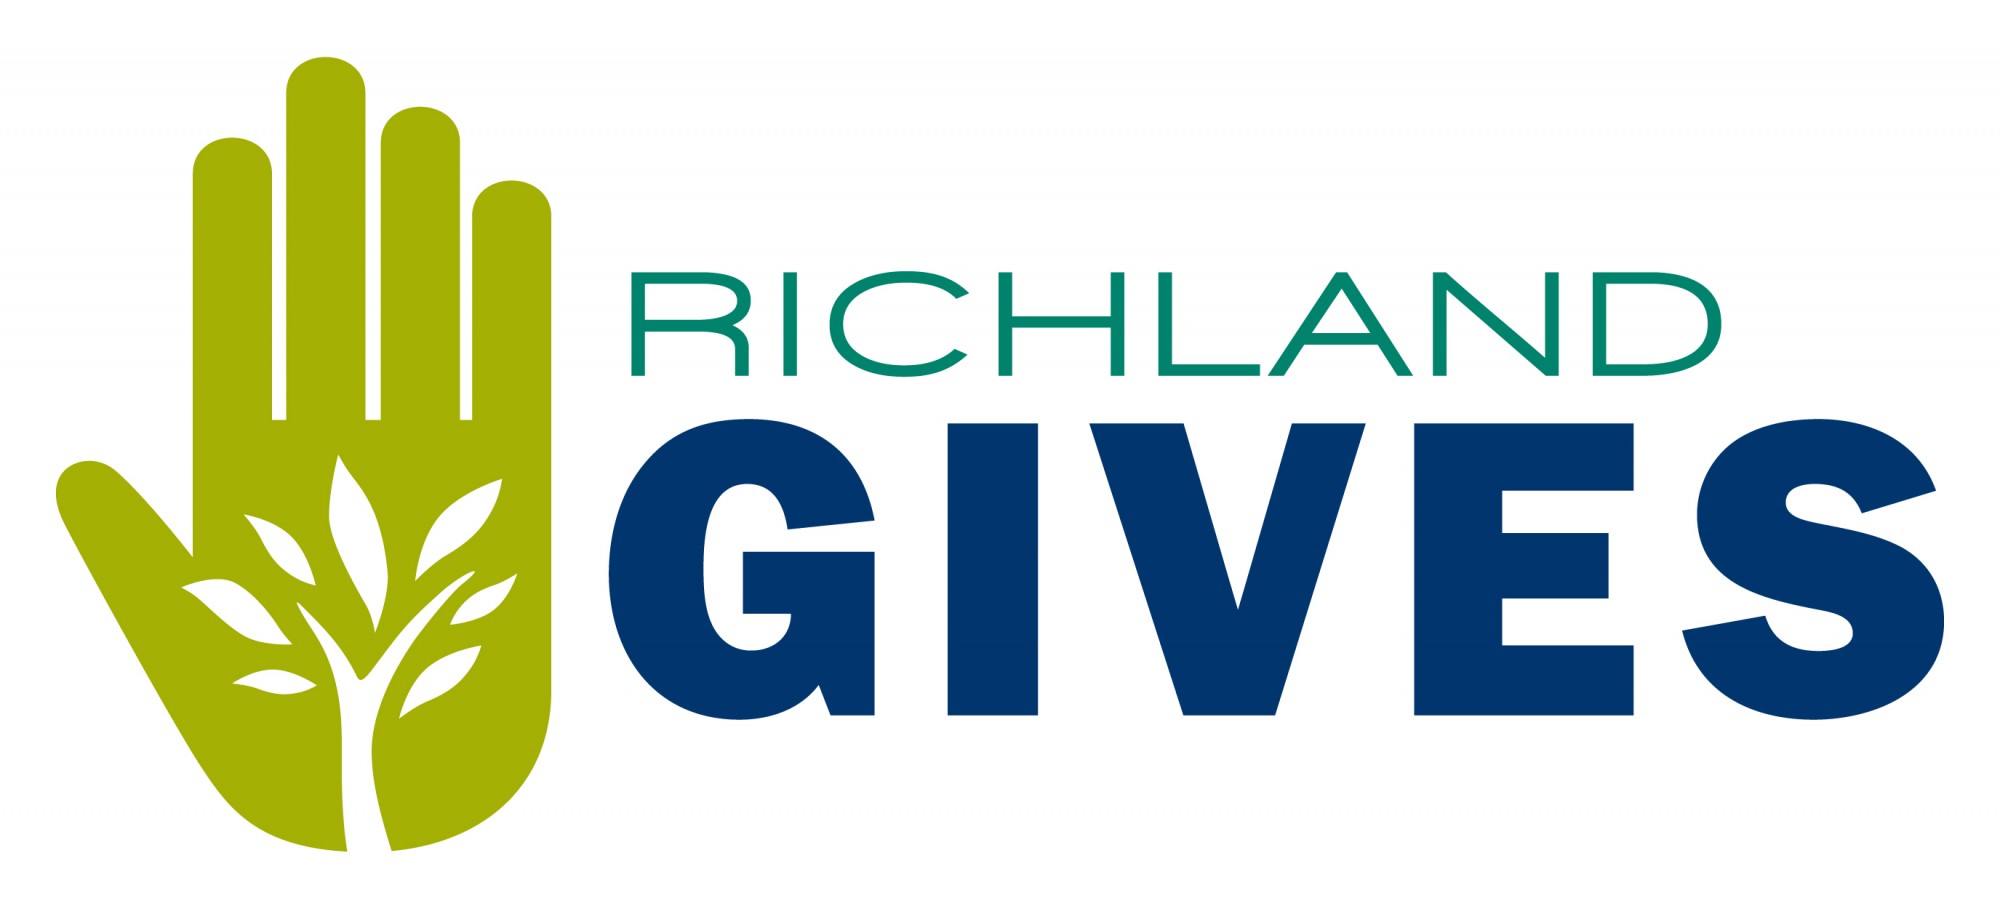 Richland Gives helps local nonprofits fundraise operating revenue